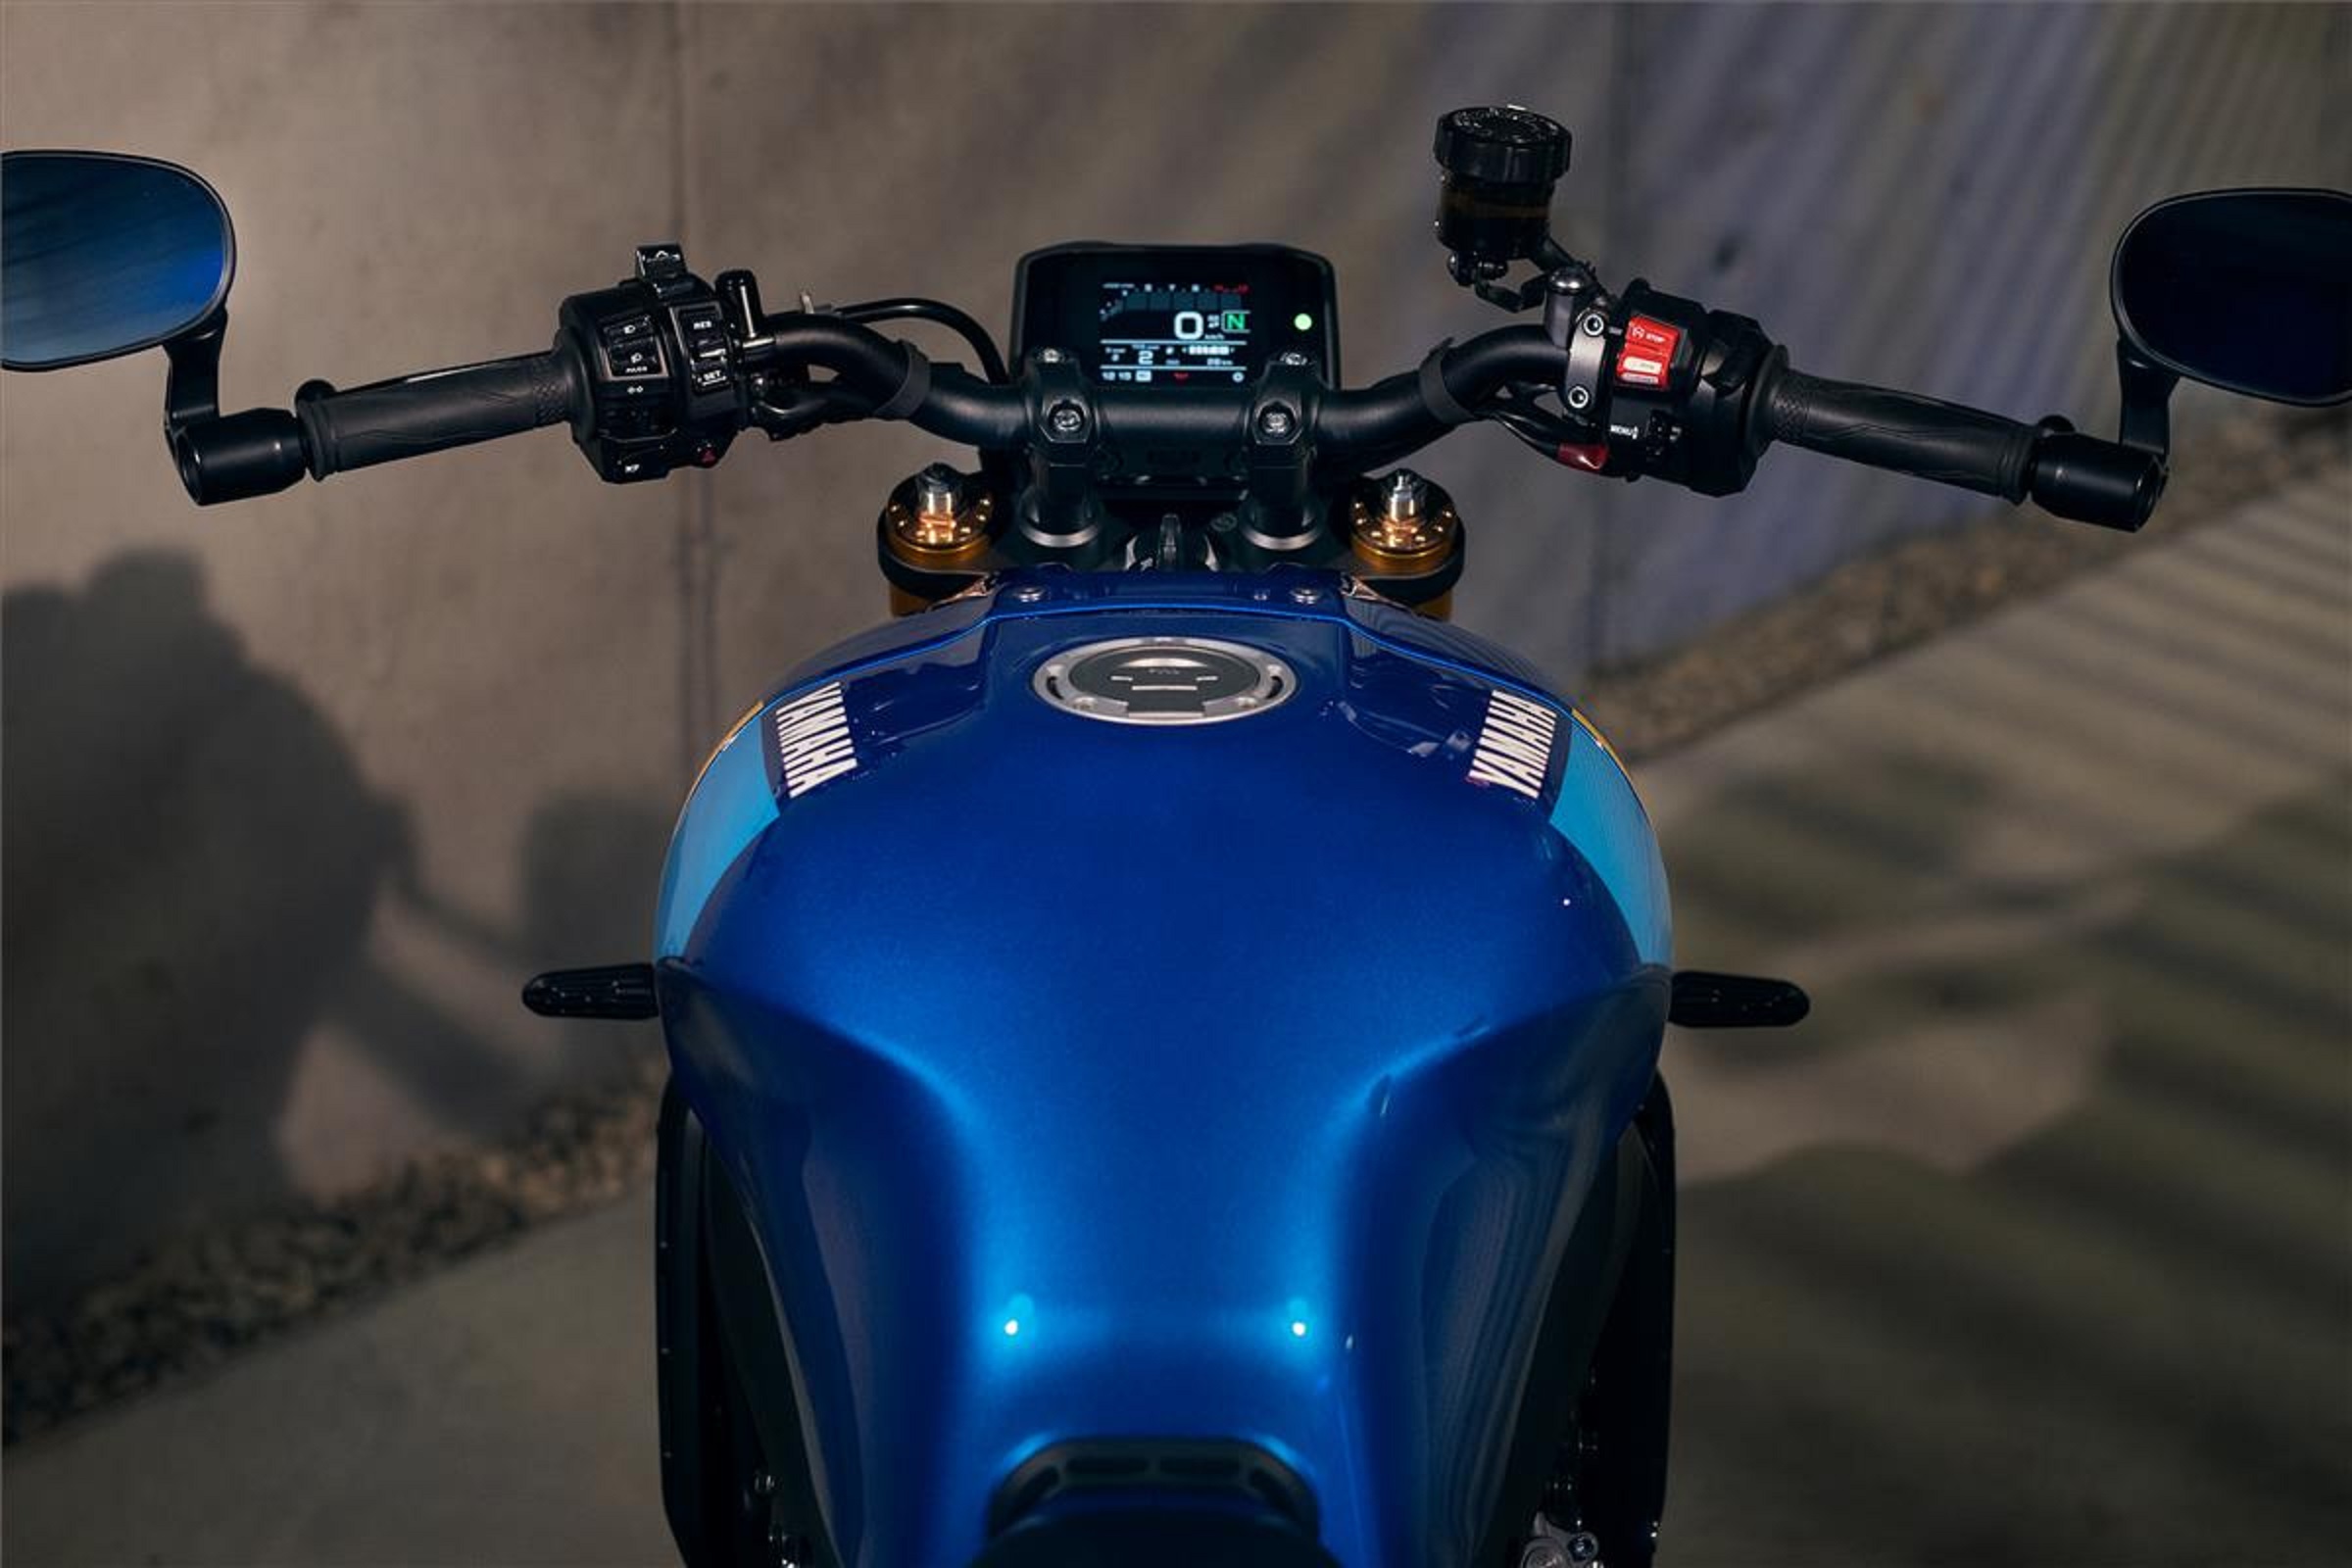 The full-color TFT dash and black handlebars with bar-end mirrors of a blue 2022 Yamaha XSR900